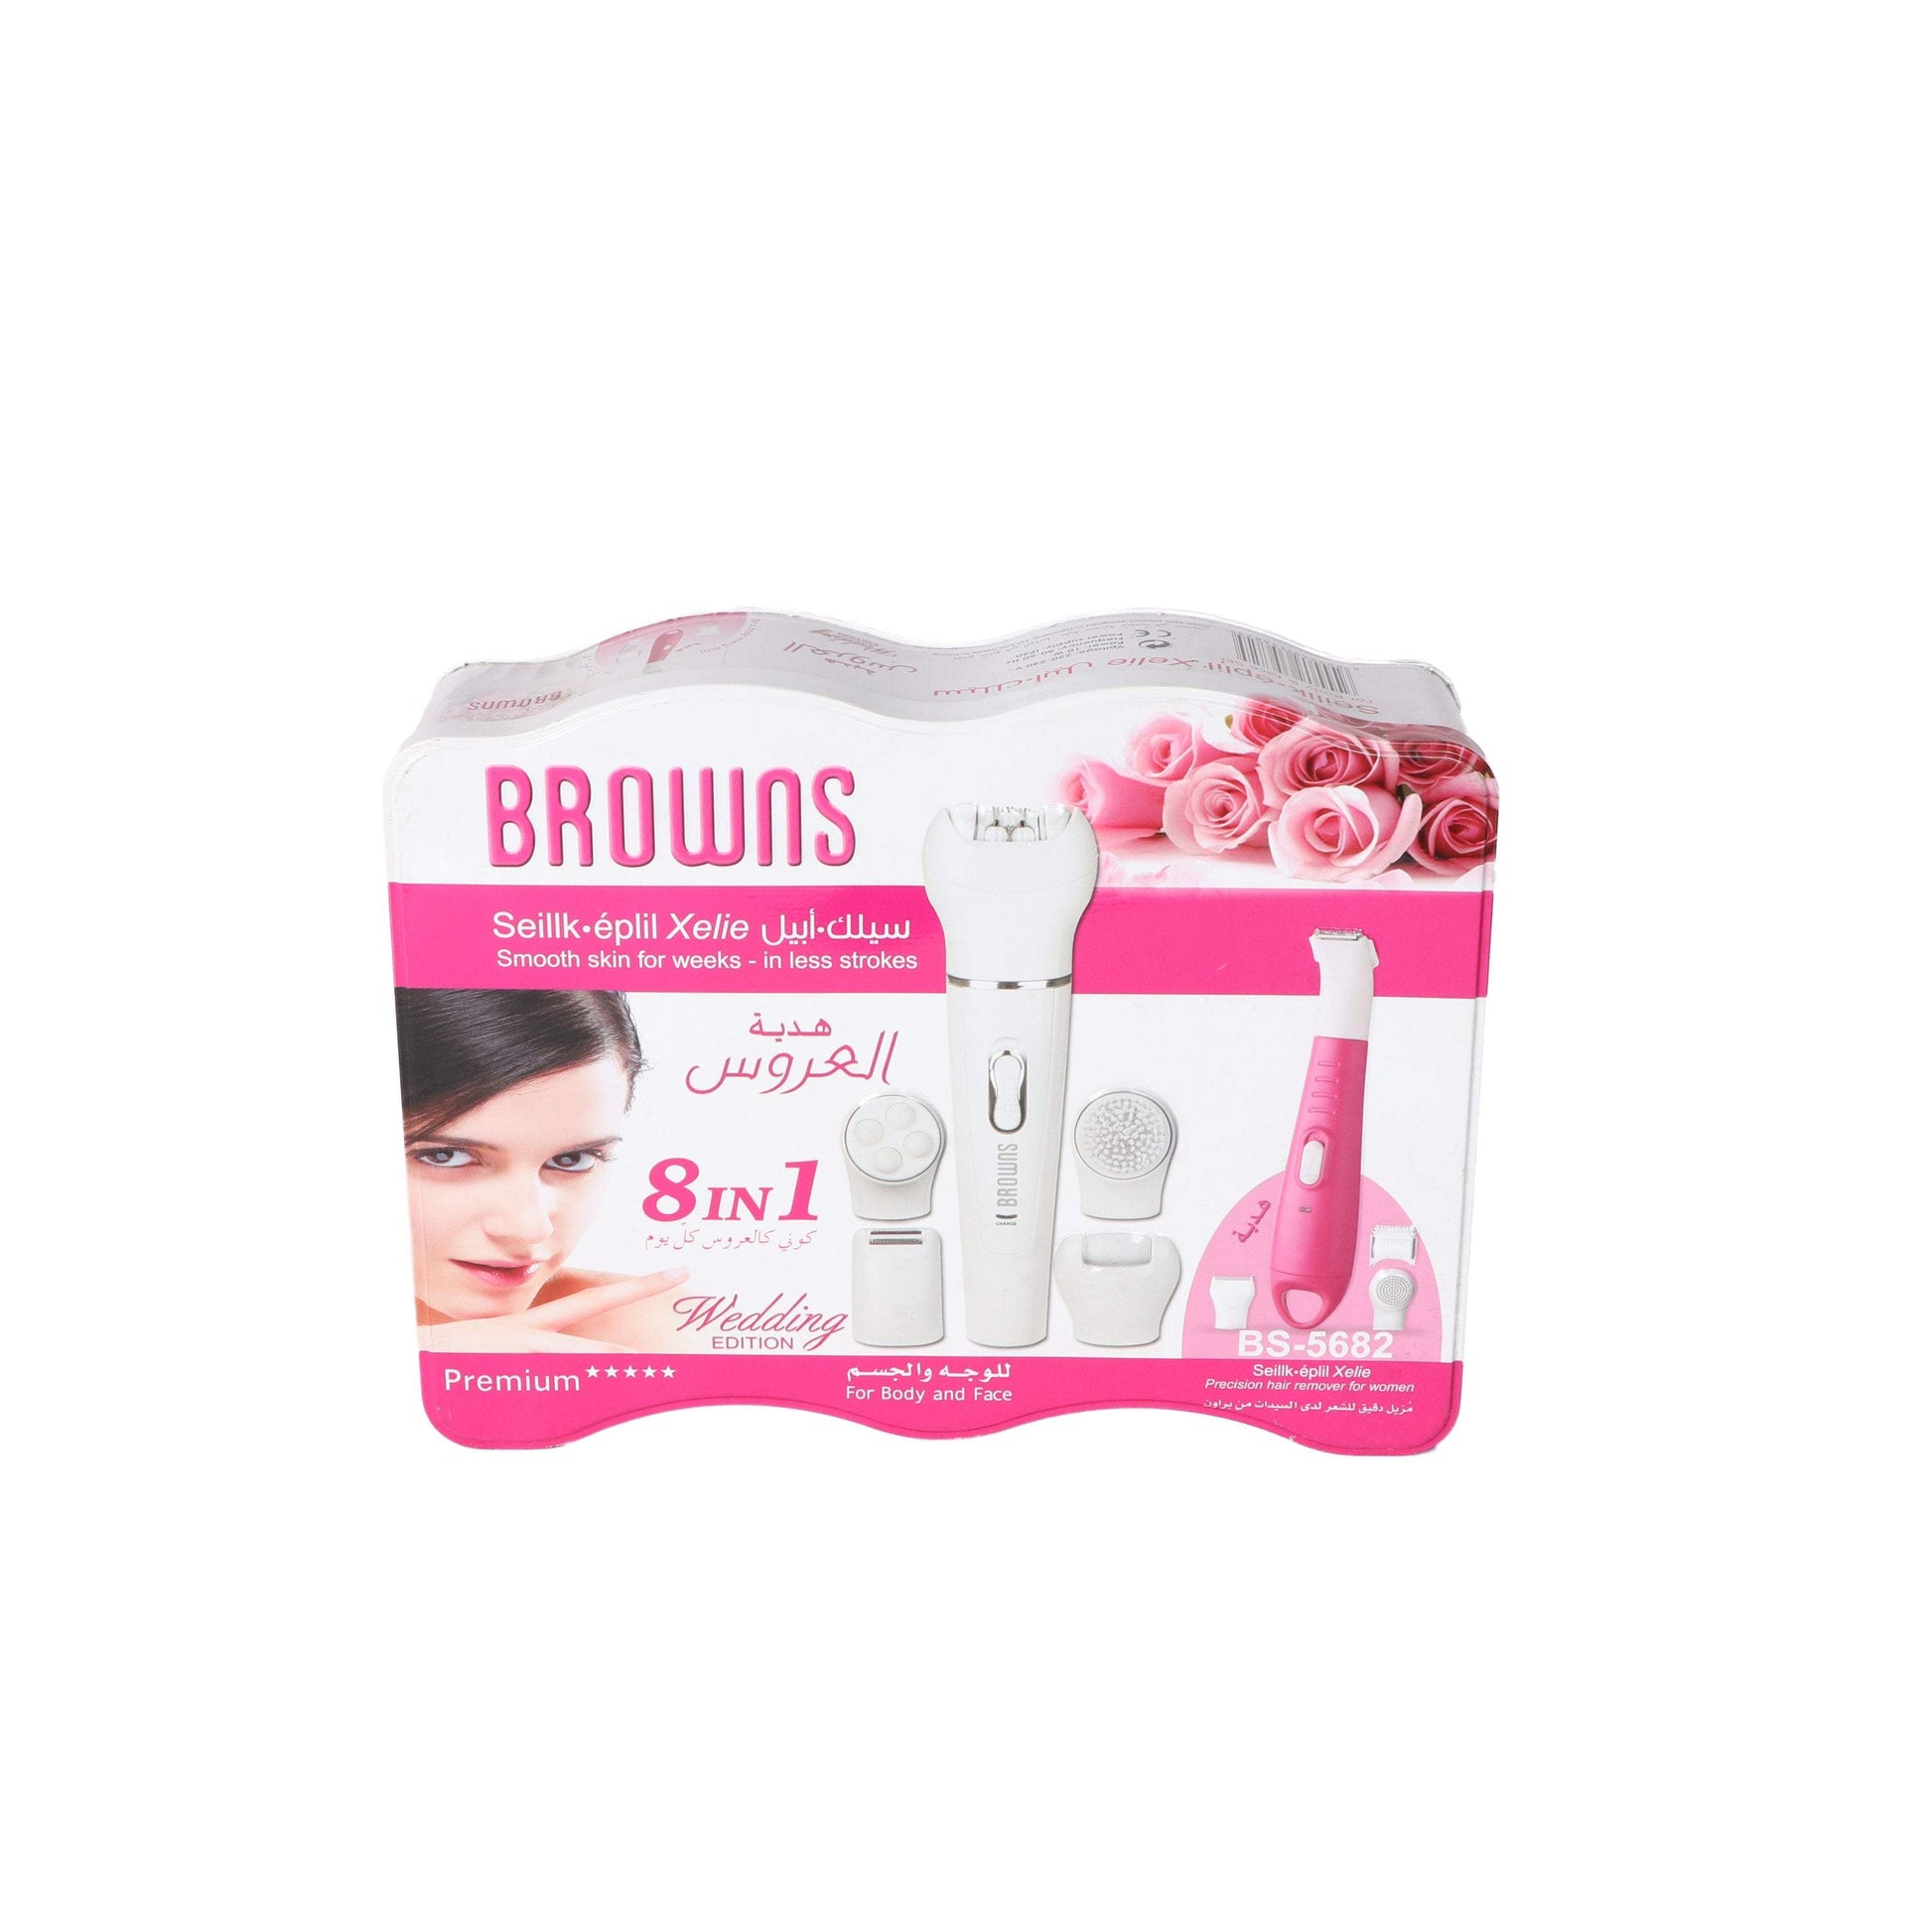 Browns Silk-épil hair remover from the roots for face, body and skin care Be like a bride every day-Royal Brands Co-